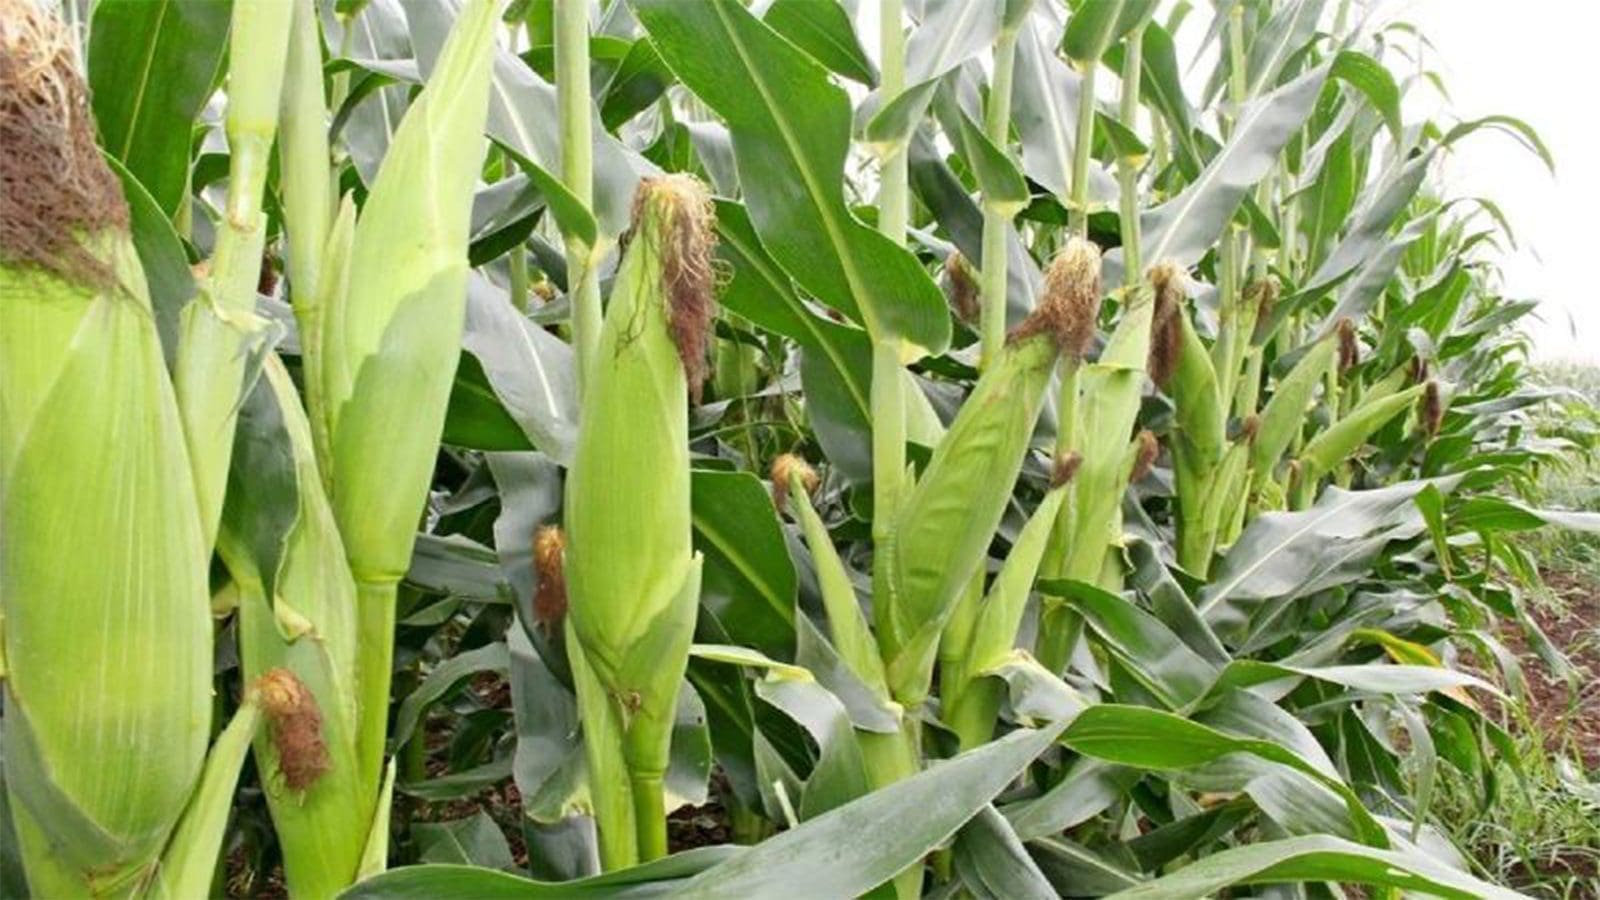 Nigeria approves drought-tolerant, insect-resistant maize varieties